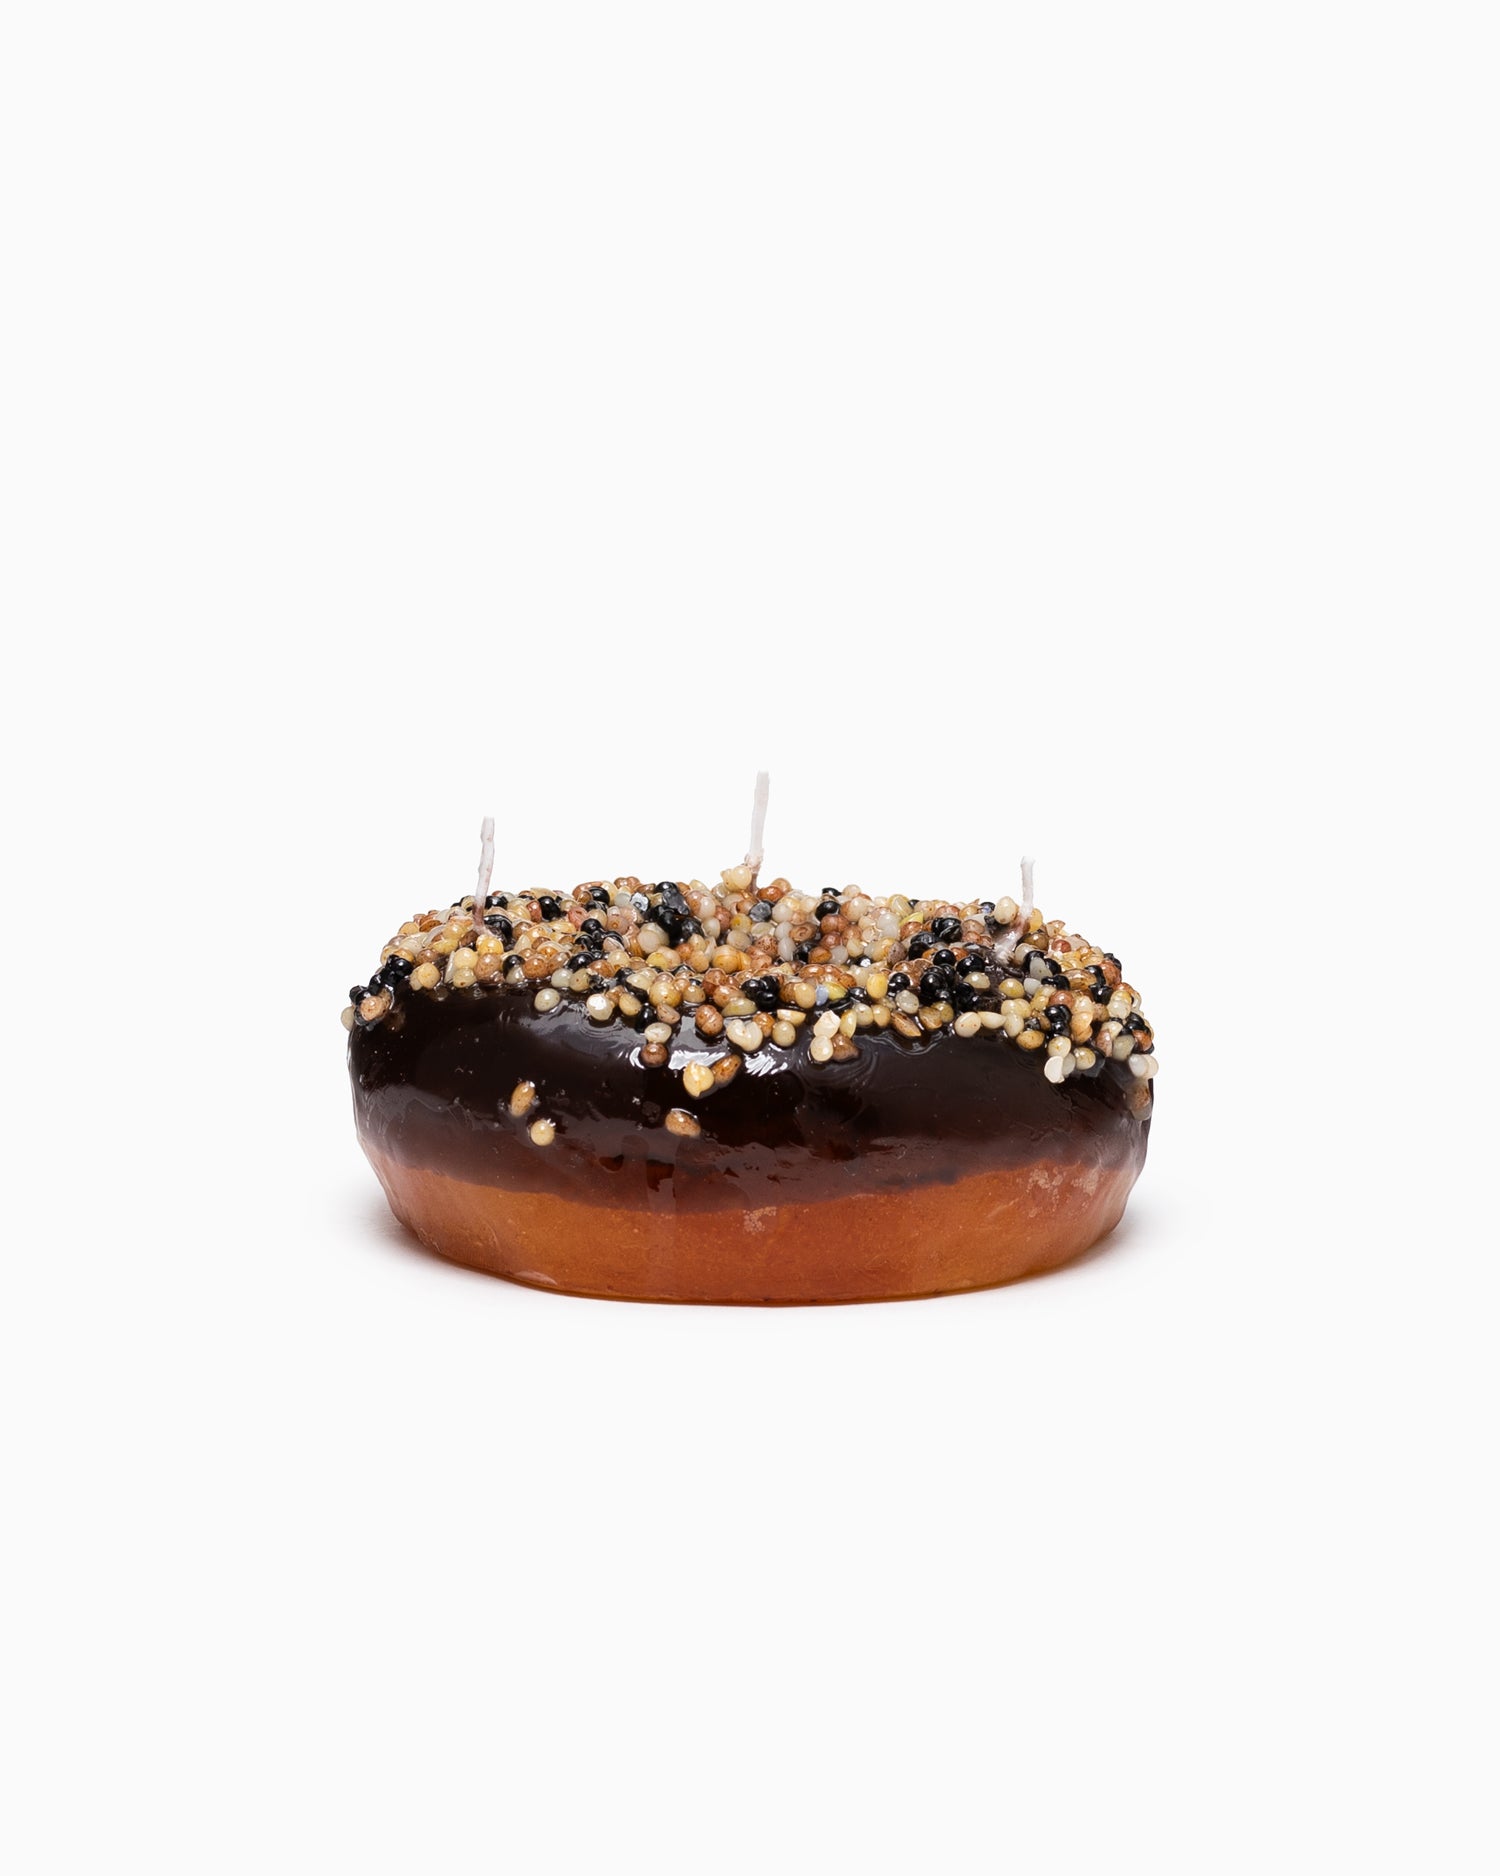 Donut Candle - Chocolate Glazed with Sprinkles